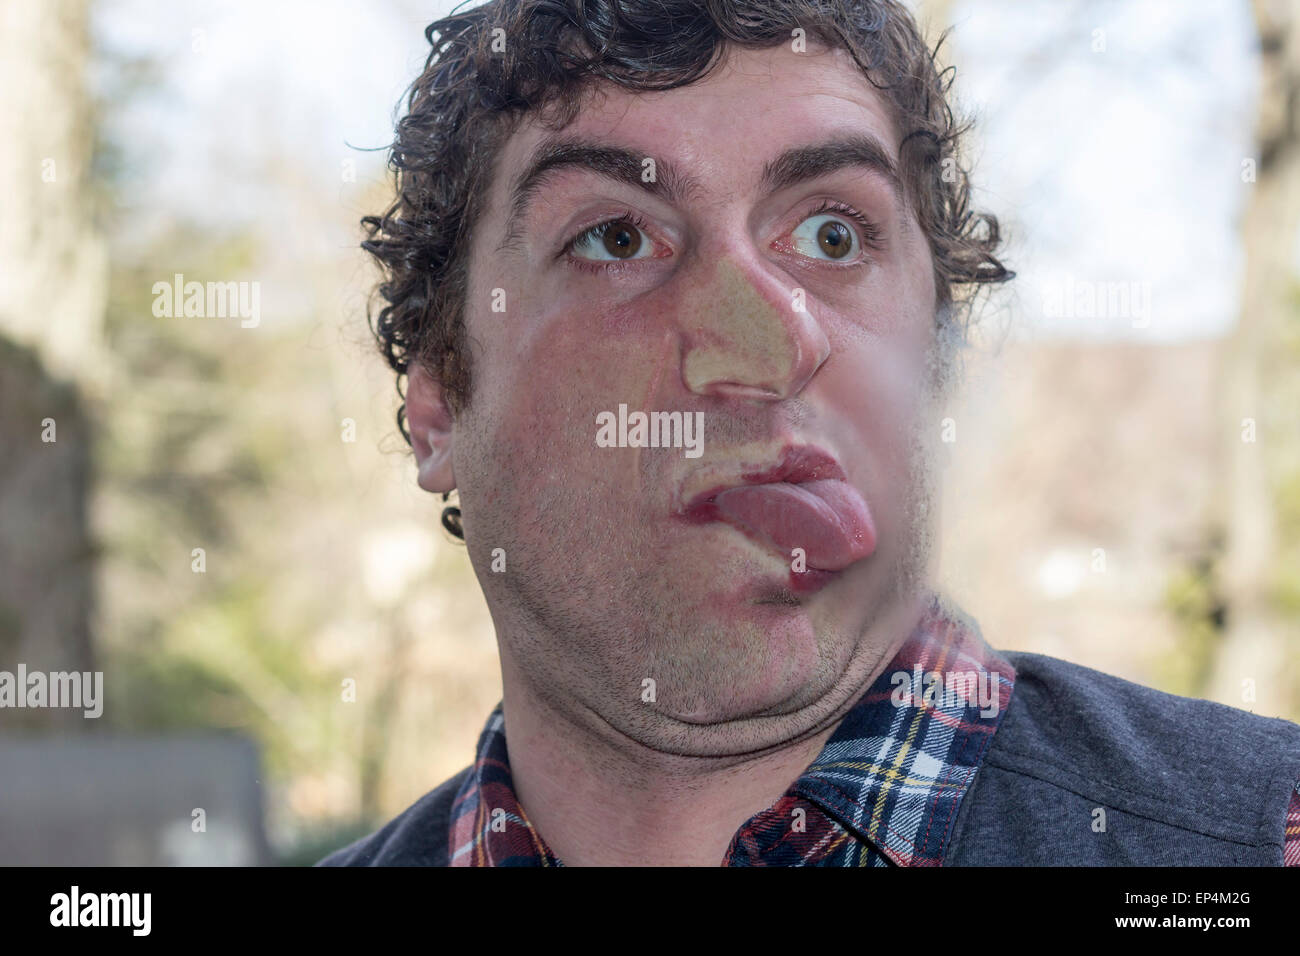 Crazy lunatic man smooshes face against glass surfaces Stock Photo